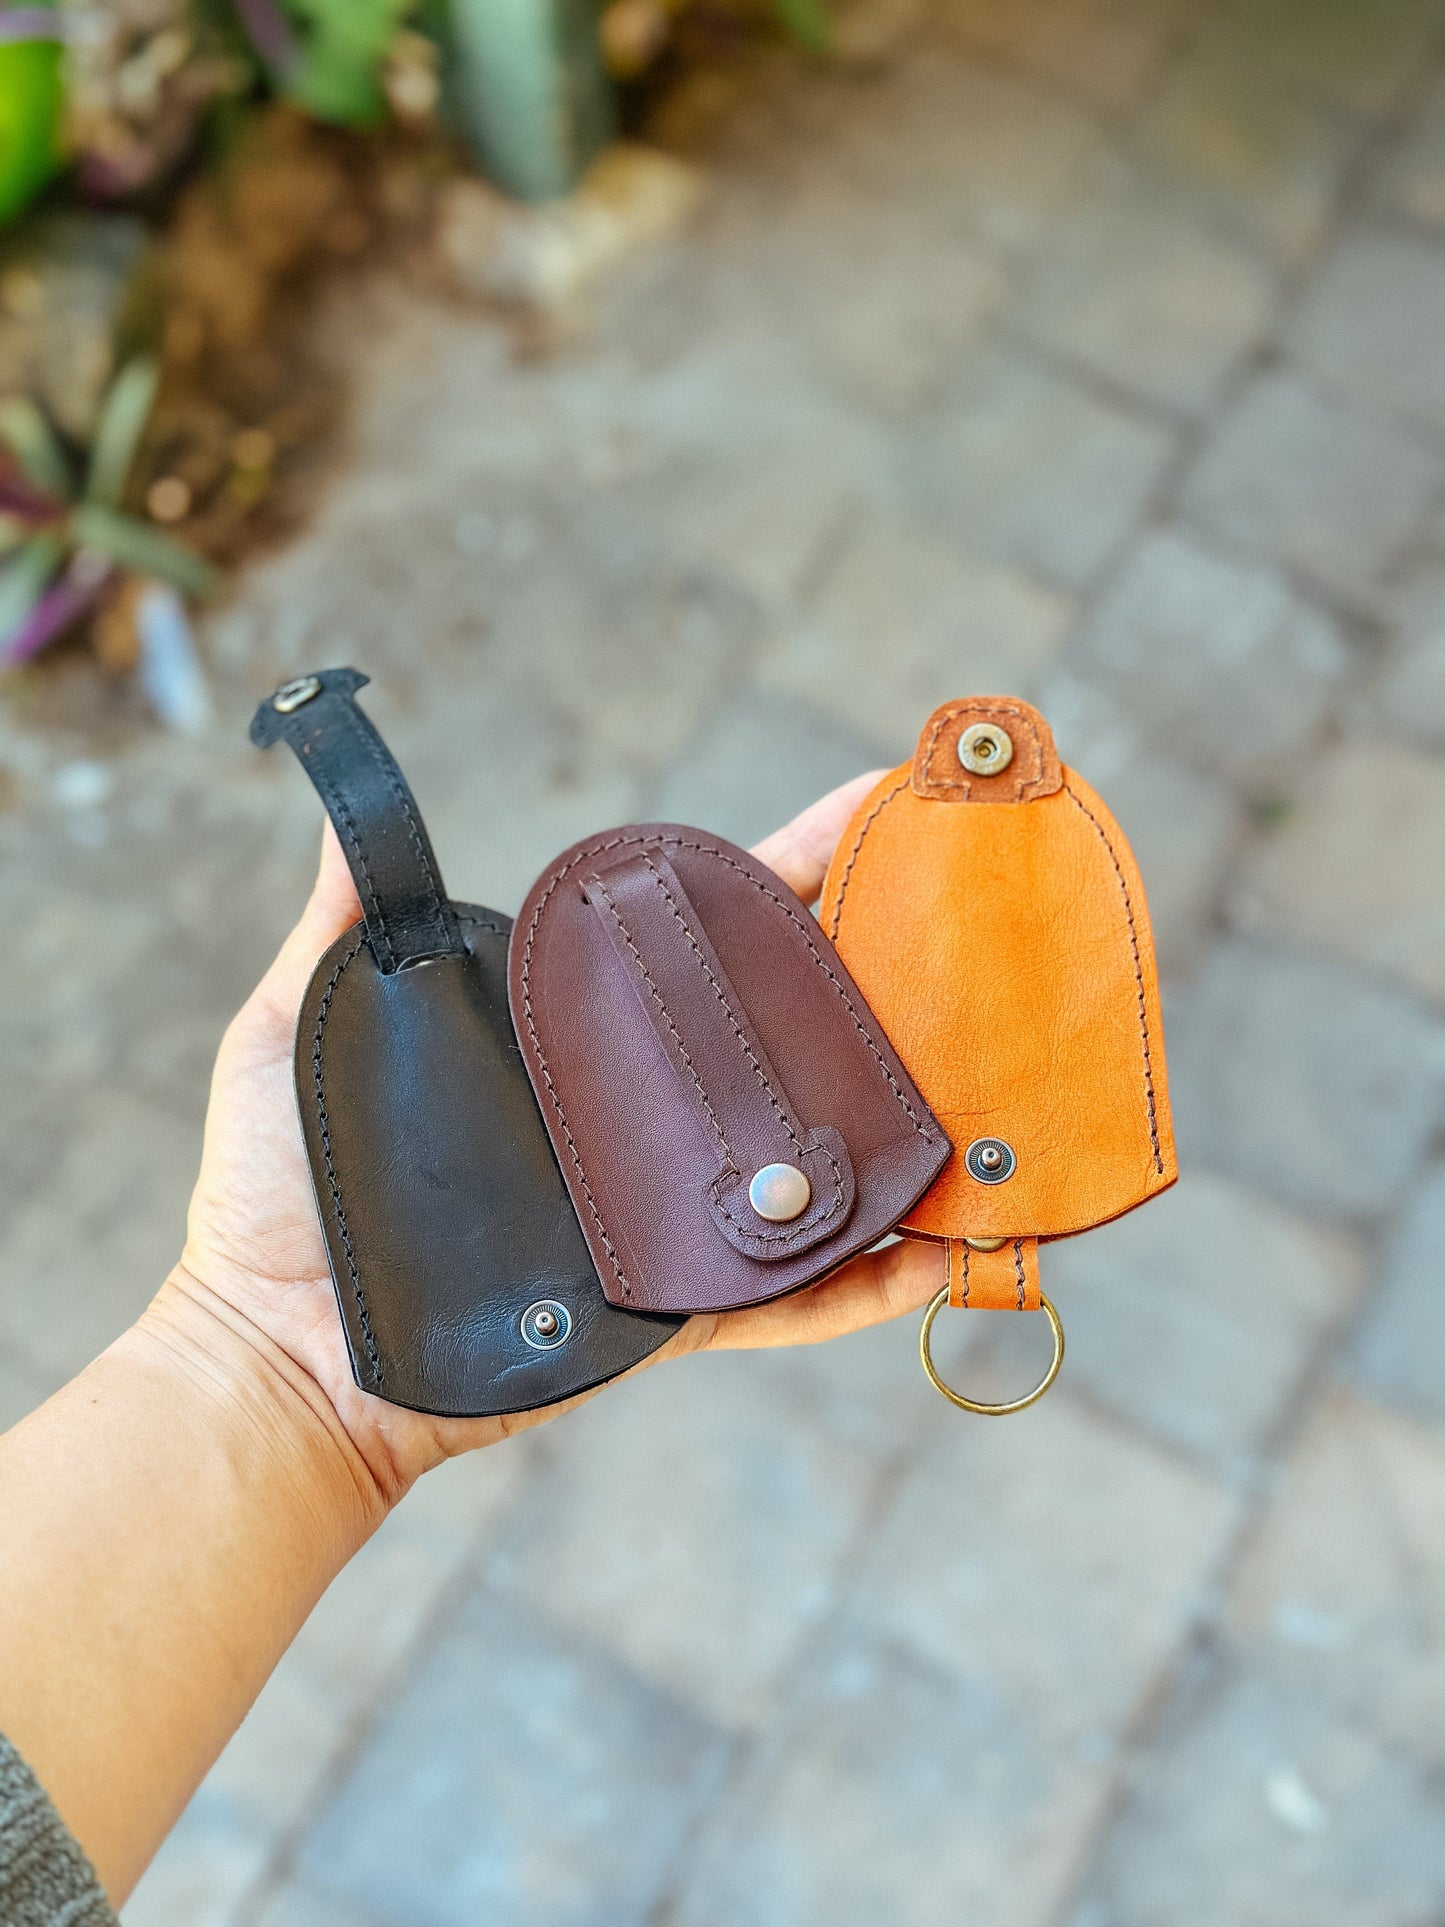 Handmade Leather Key Case Leather Key Holder With Pull Strap 